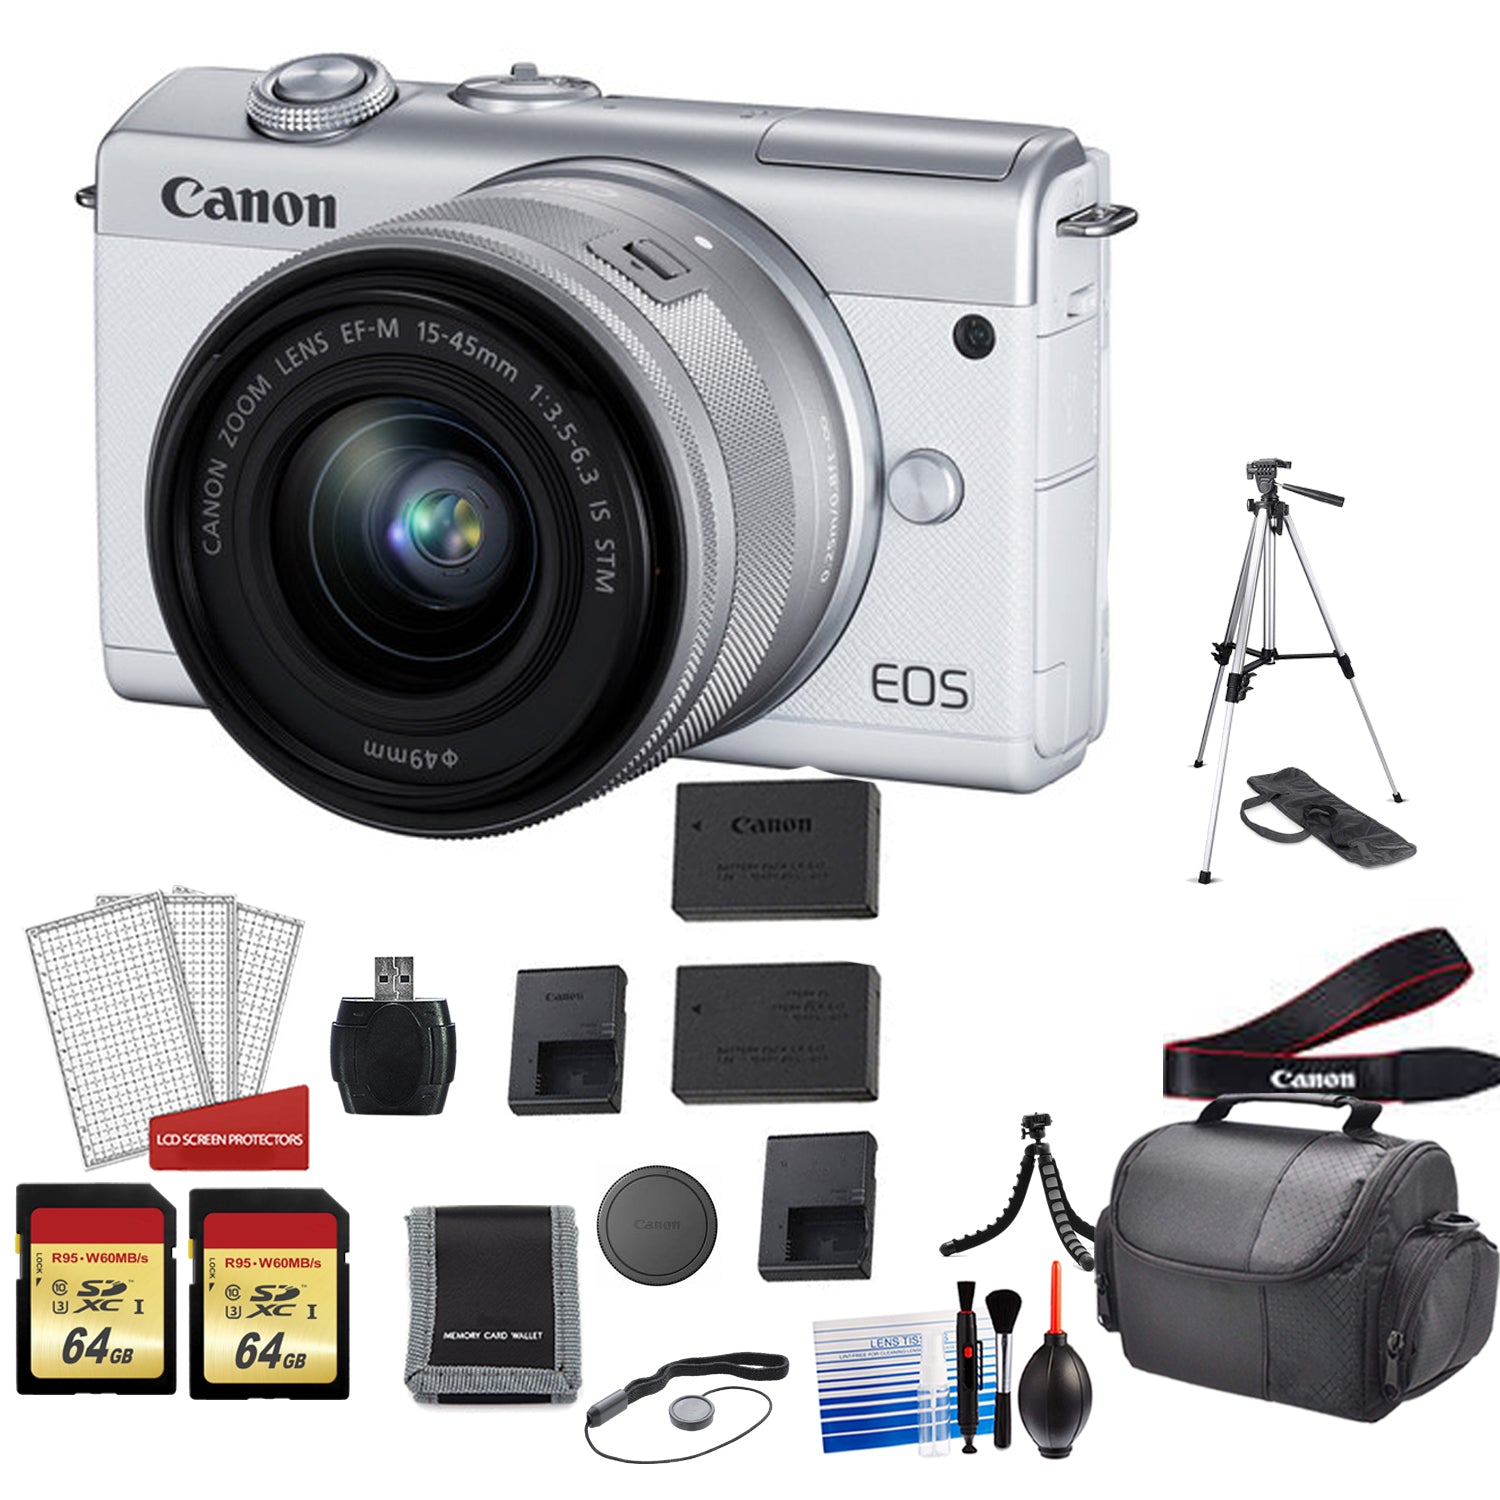 Canon EOS M200 Mirrorless Digital Camera with 15-45mm Lens (White) Kit with Spare Battery + 2x 64GB Memory Cards + Tripod Bundle